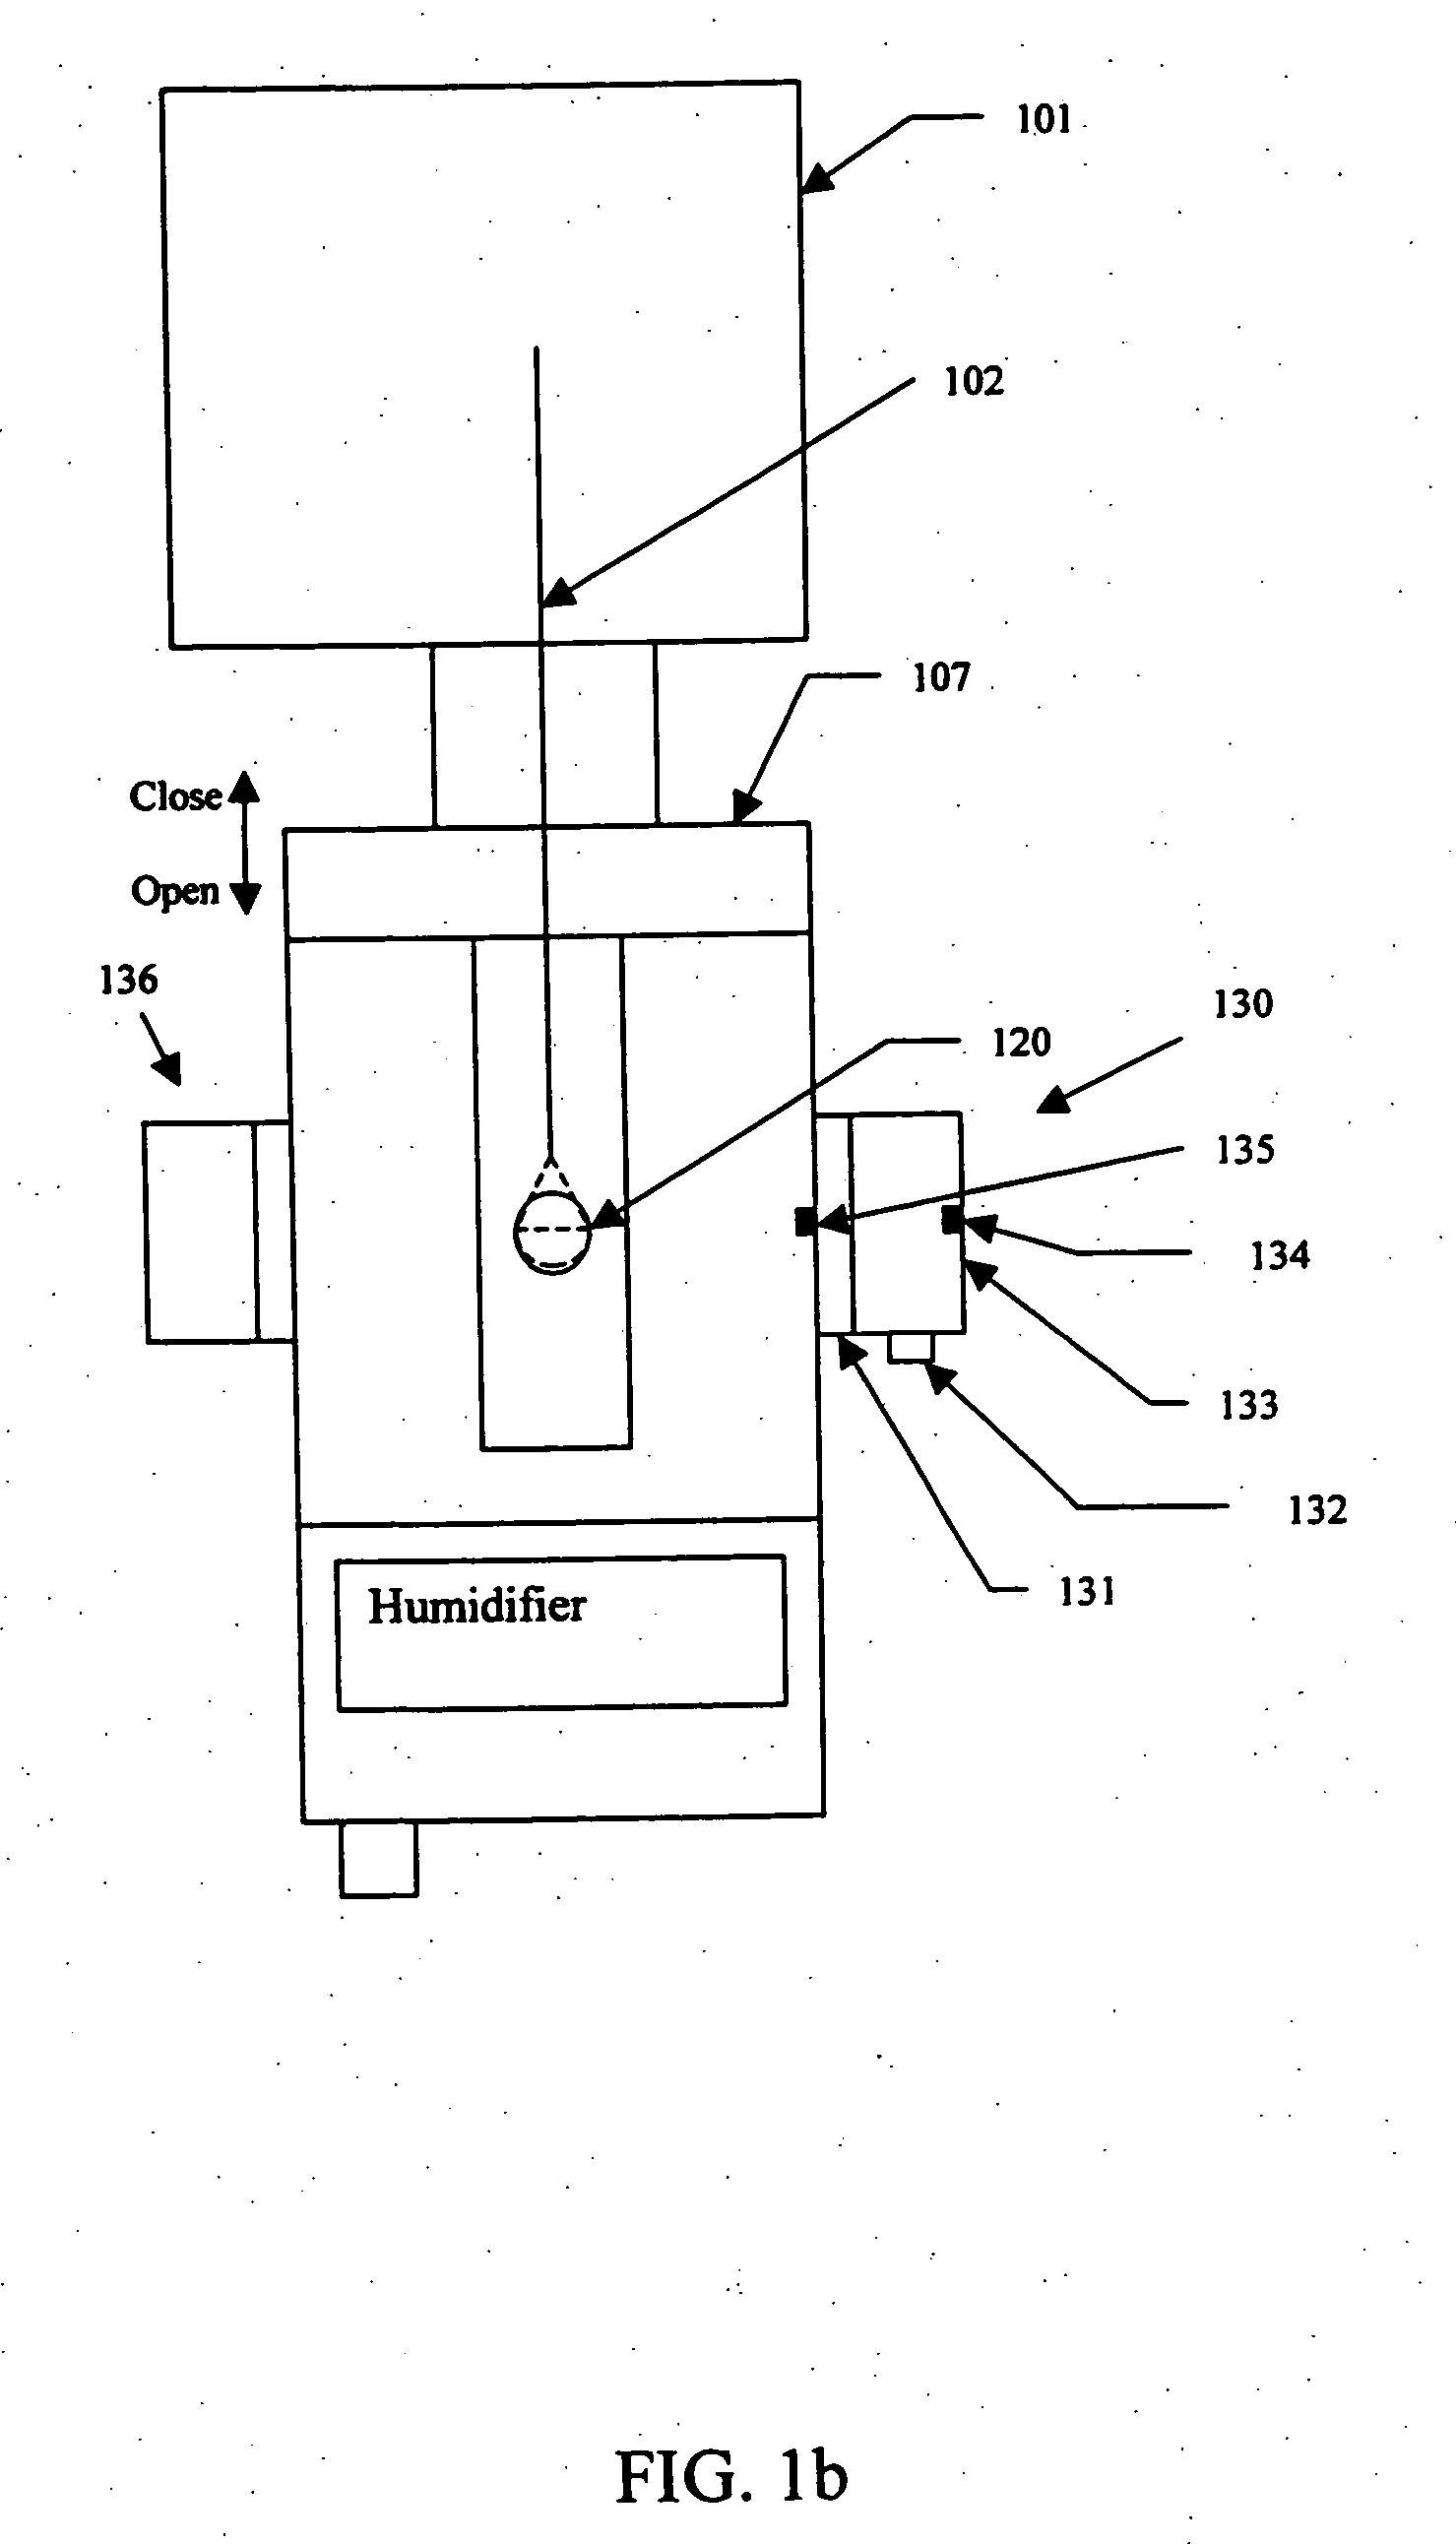 Humidity-controlled chamber for a thermogravimetric instrument